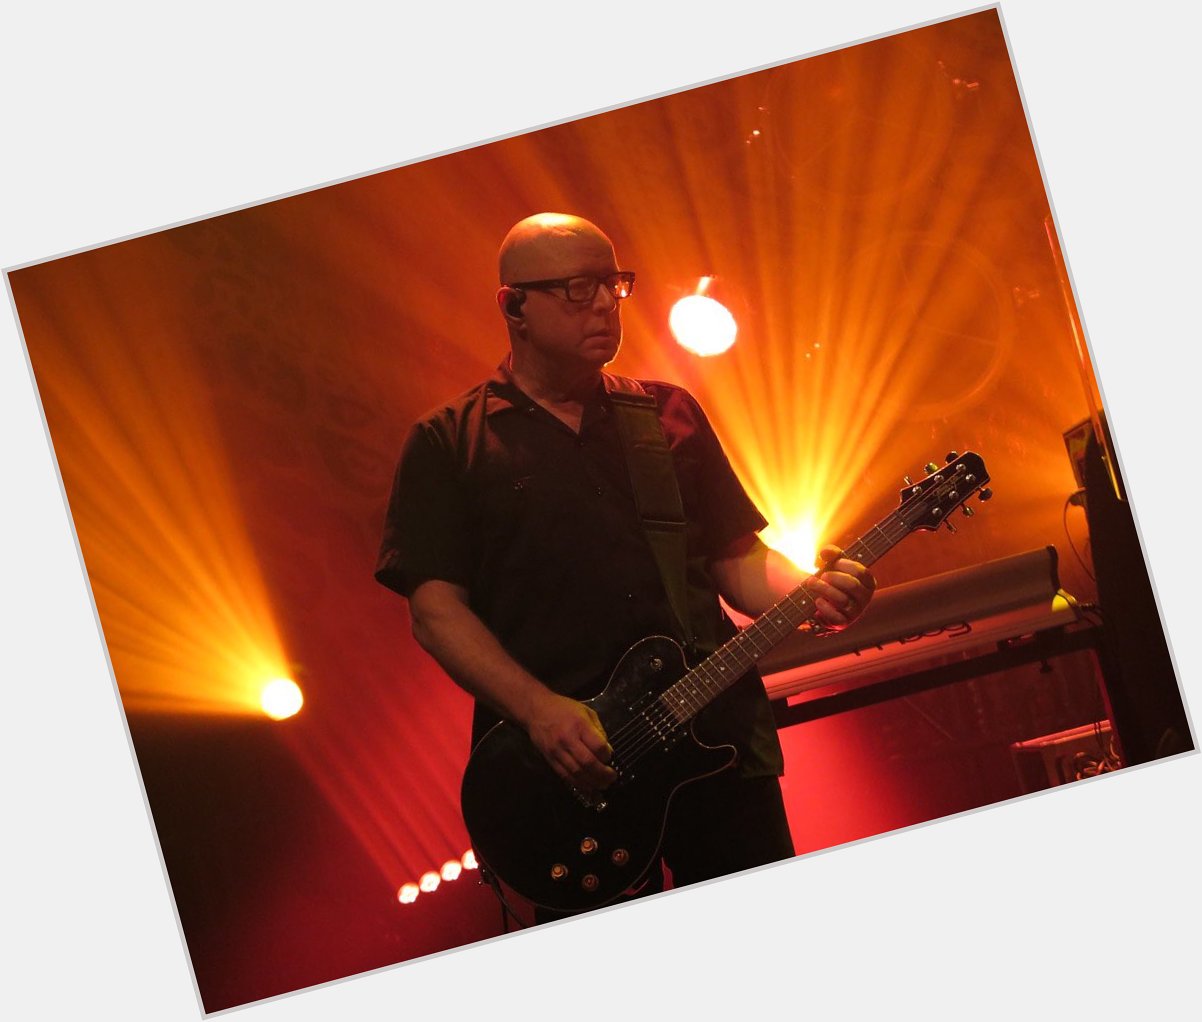 I d like to wish a happy 63rd birthday to Steve Marker, guitarist for Garbage! 